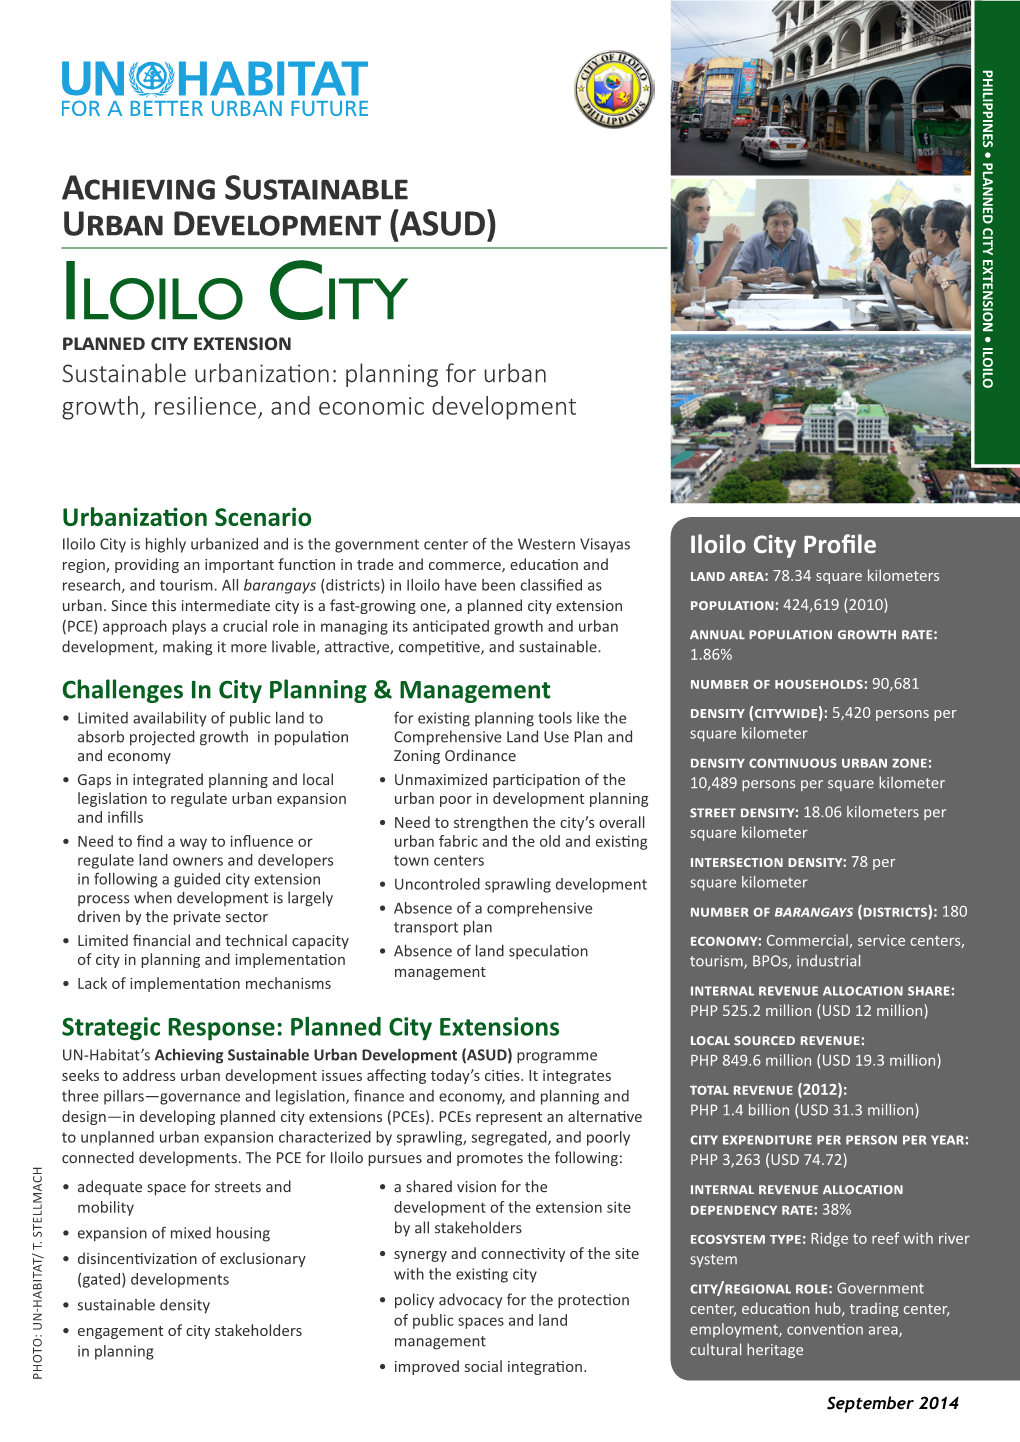 Iloilo City Planned City Extension Sustainable Urbanization: Planning for Urban Growth, Resilience, and Economic Development